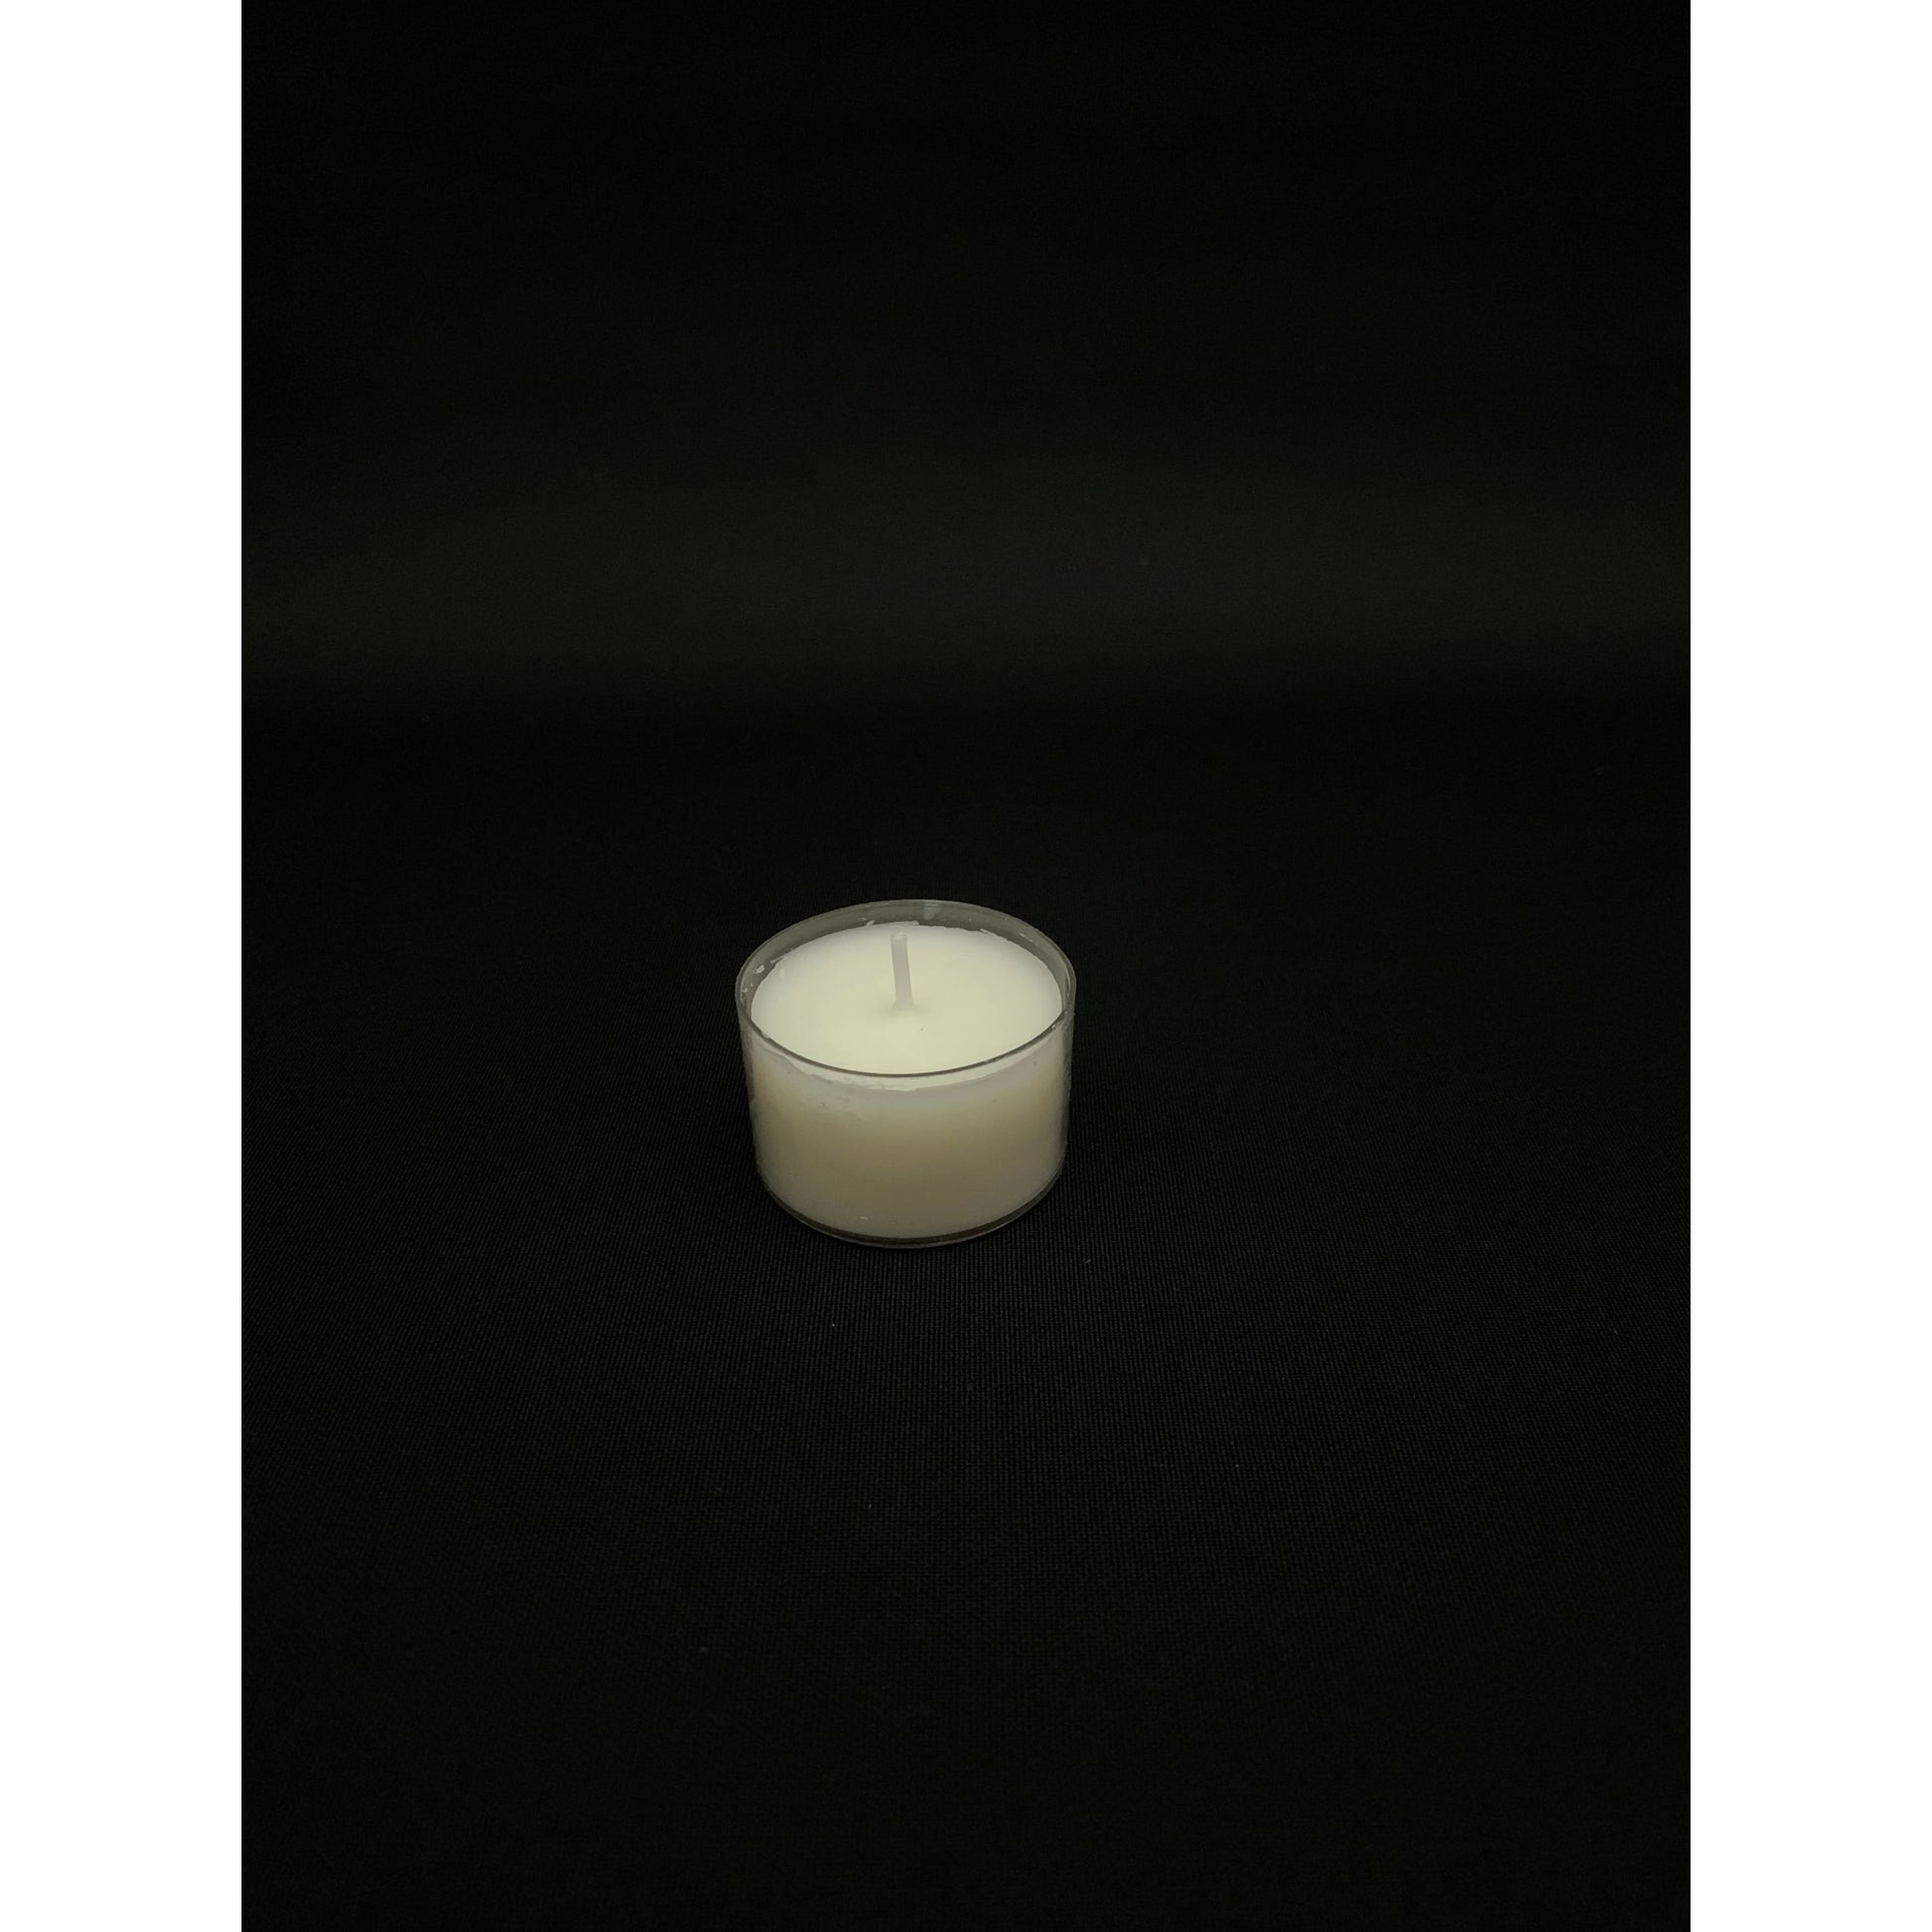 Tealight Candle Lead Free Wick